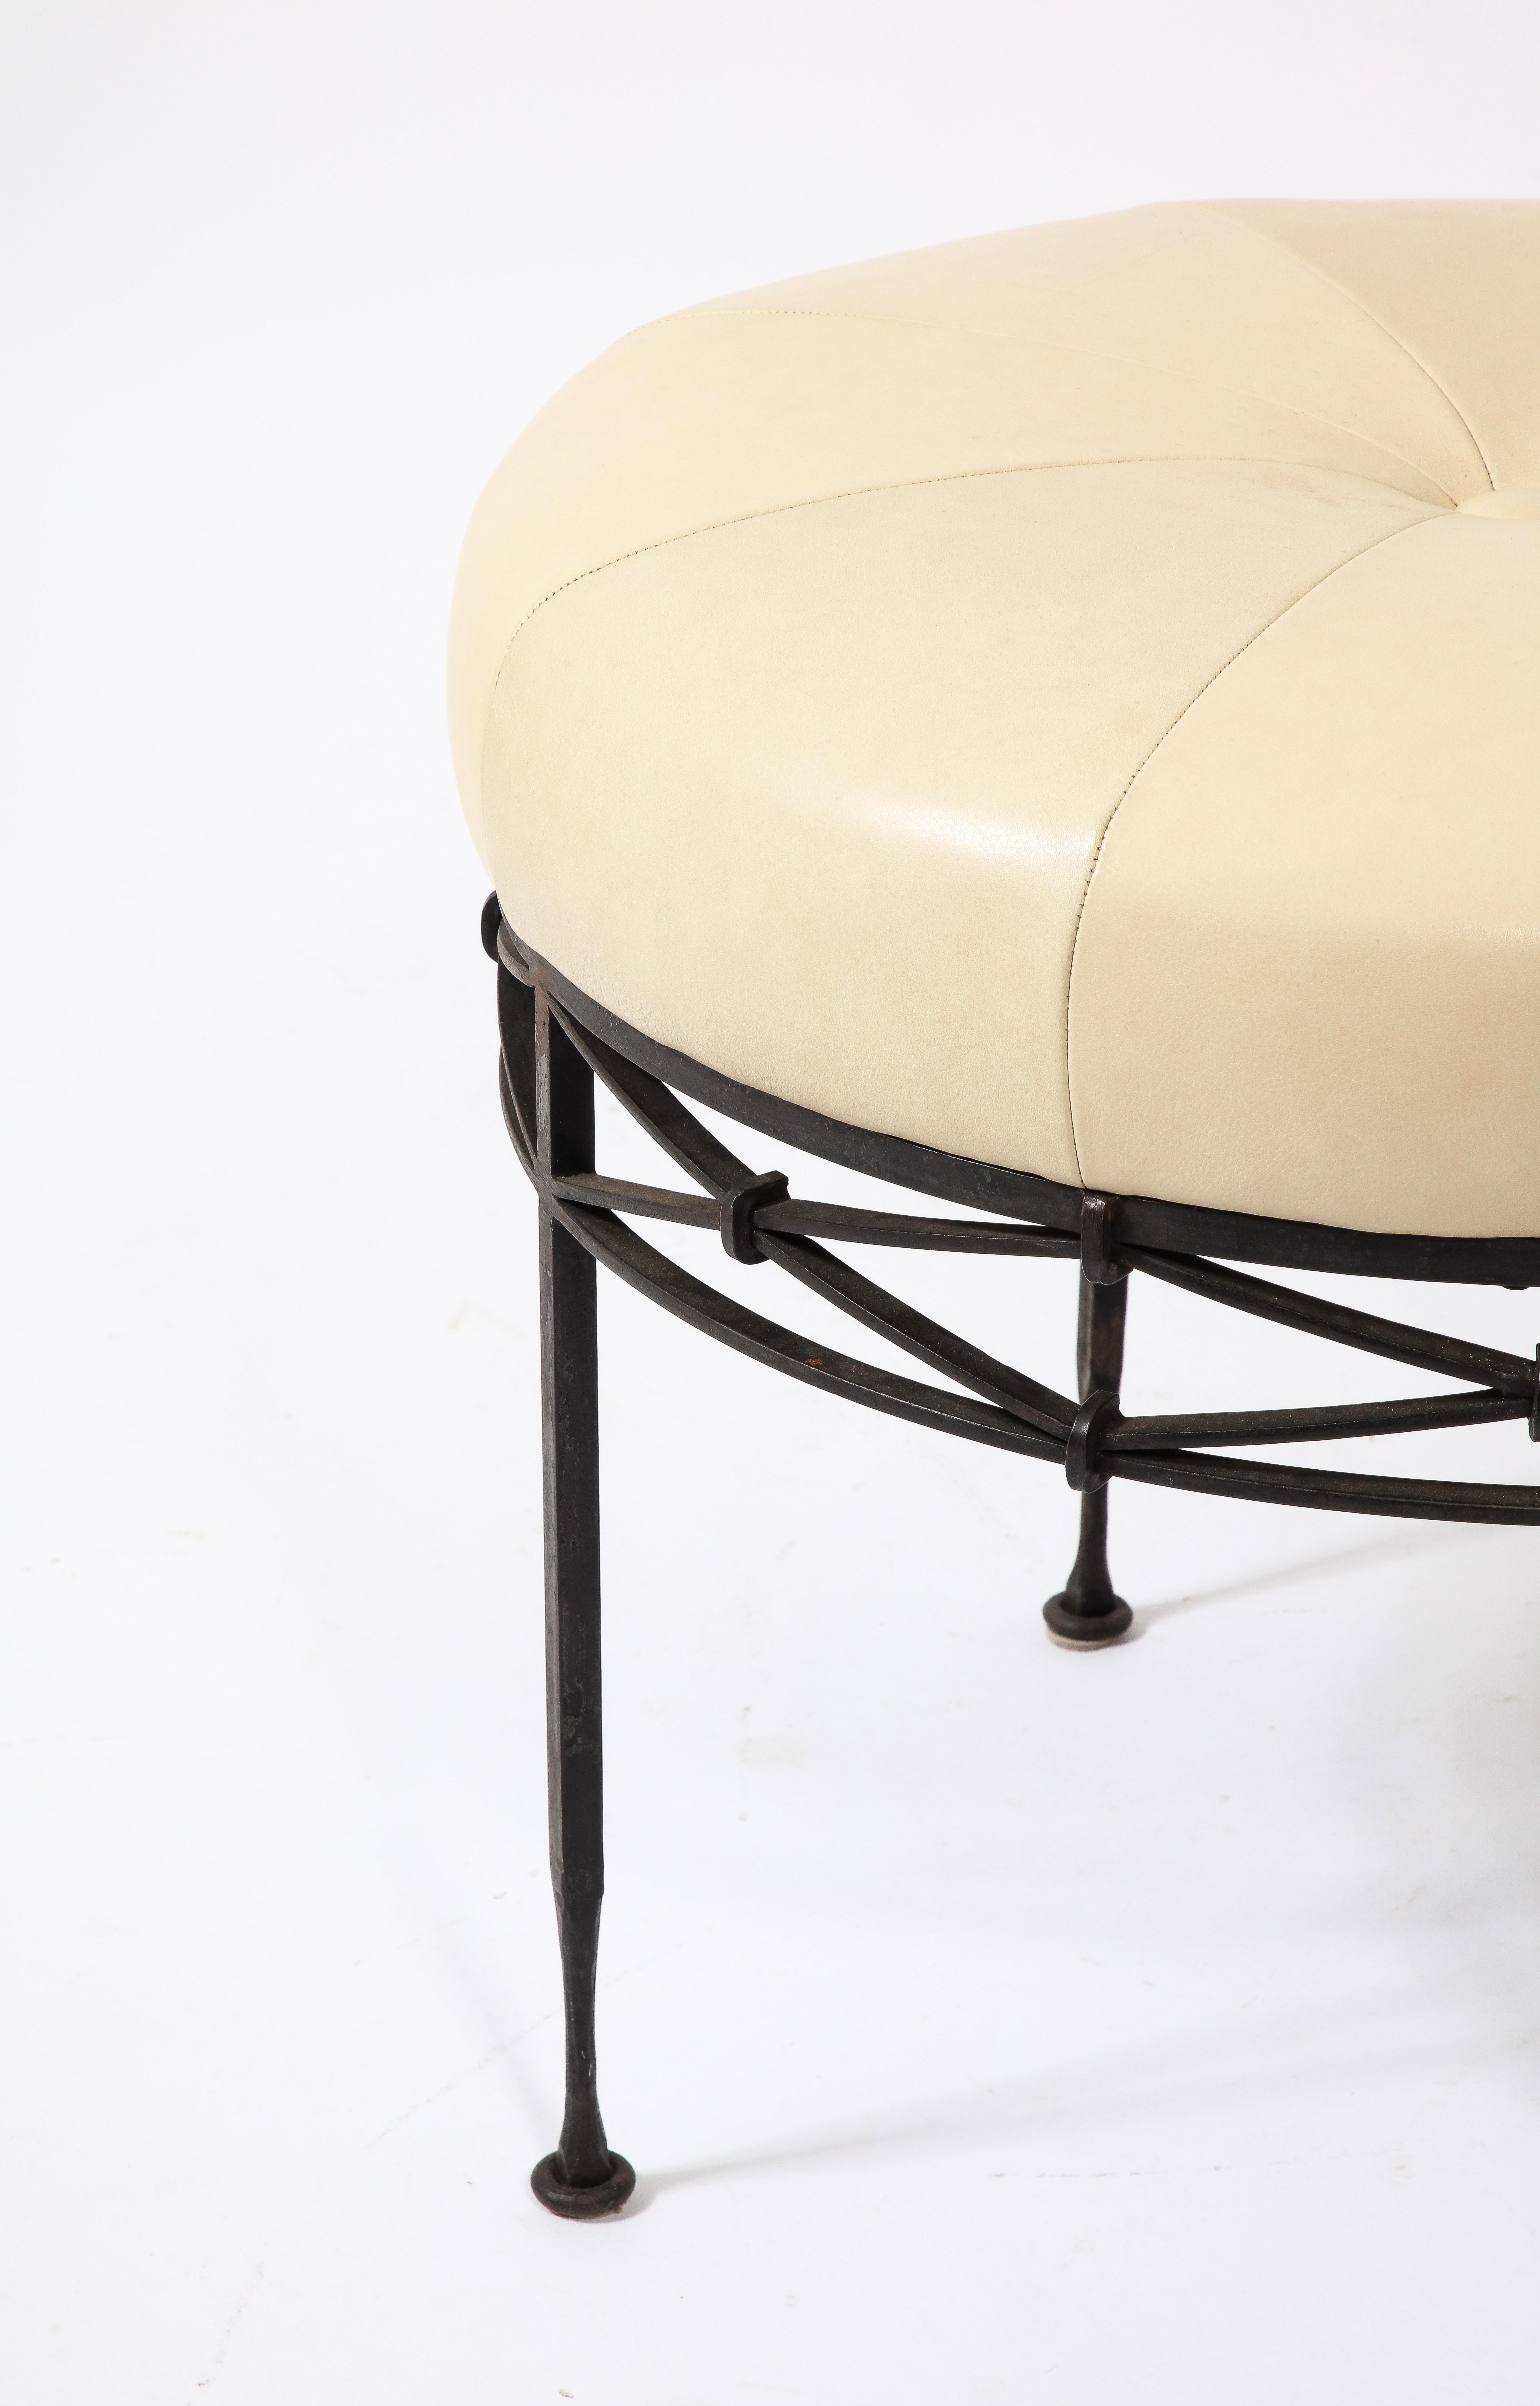 Wrought Iron & Leather Stool, France 1950's In Good Condition For Sale In New York, NY